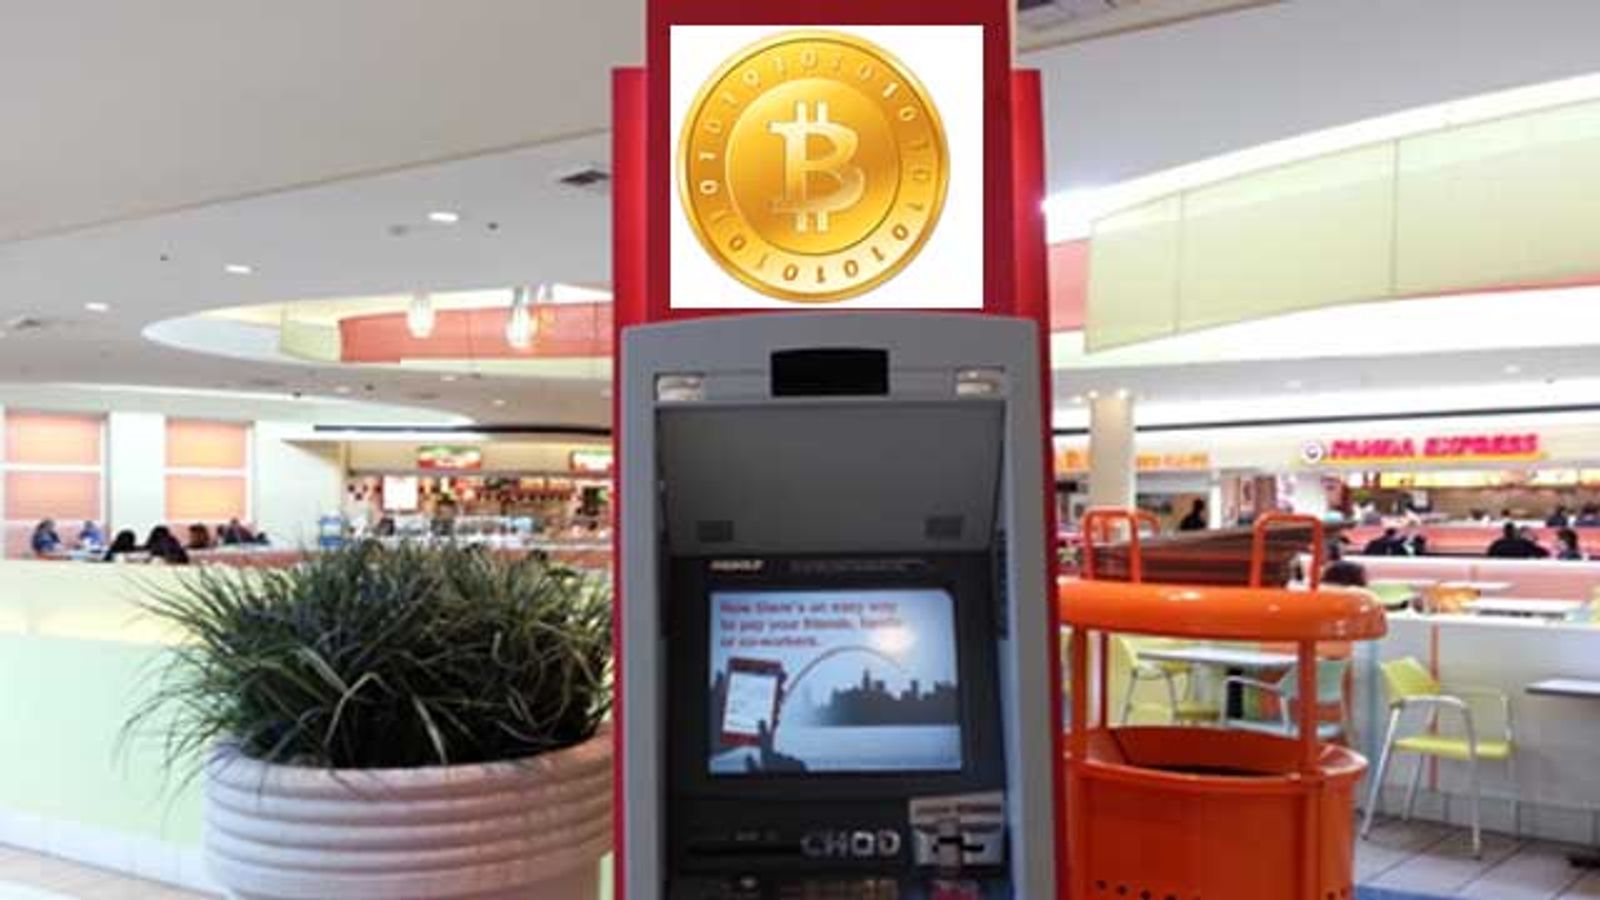 Bitcoin ATM Coming to Los Angeles, Too